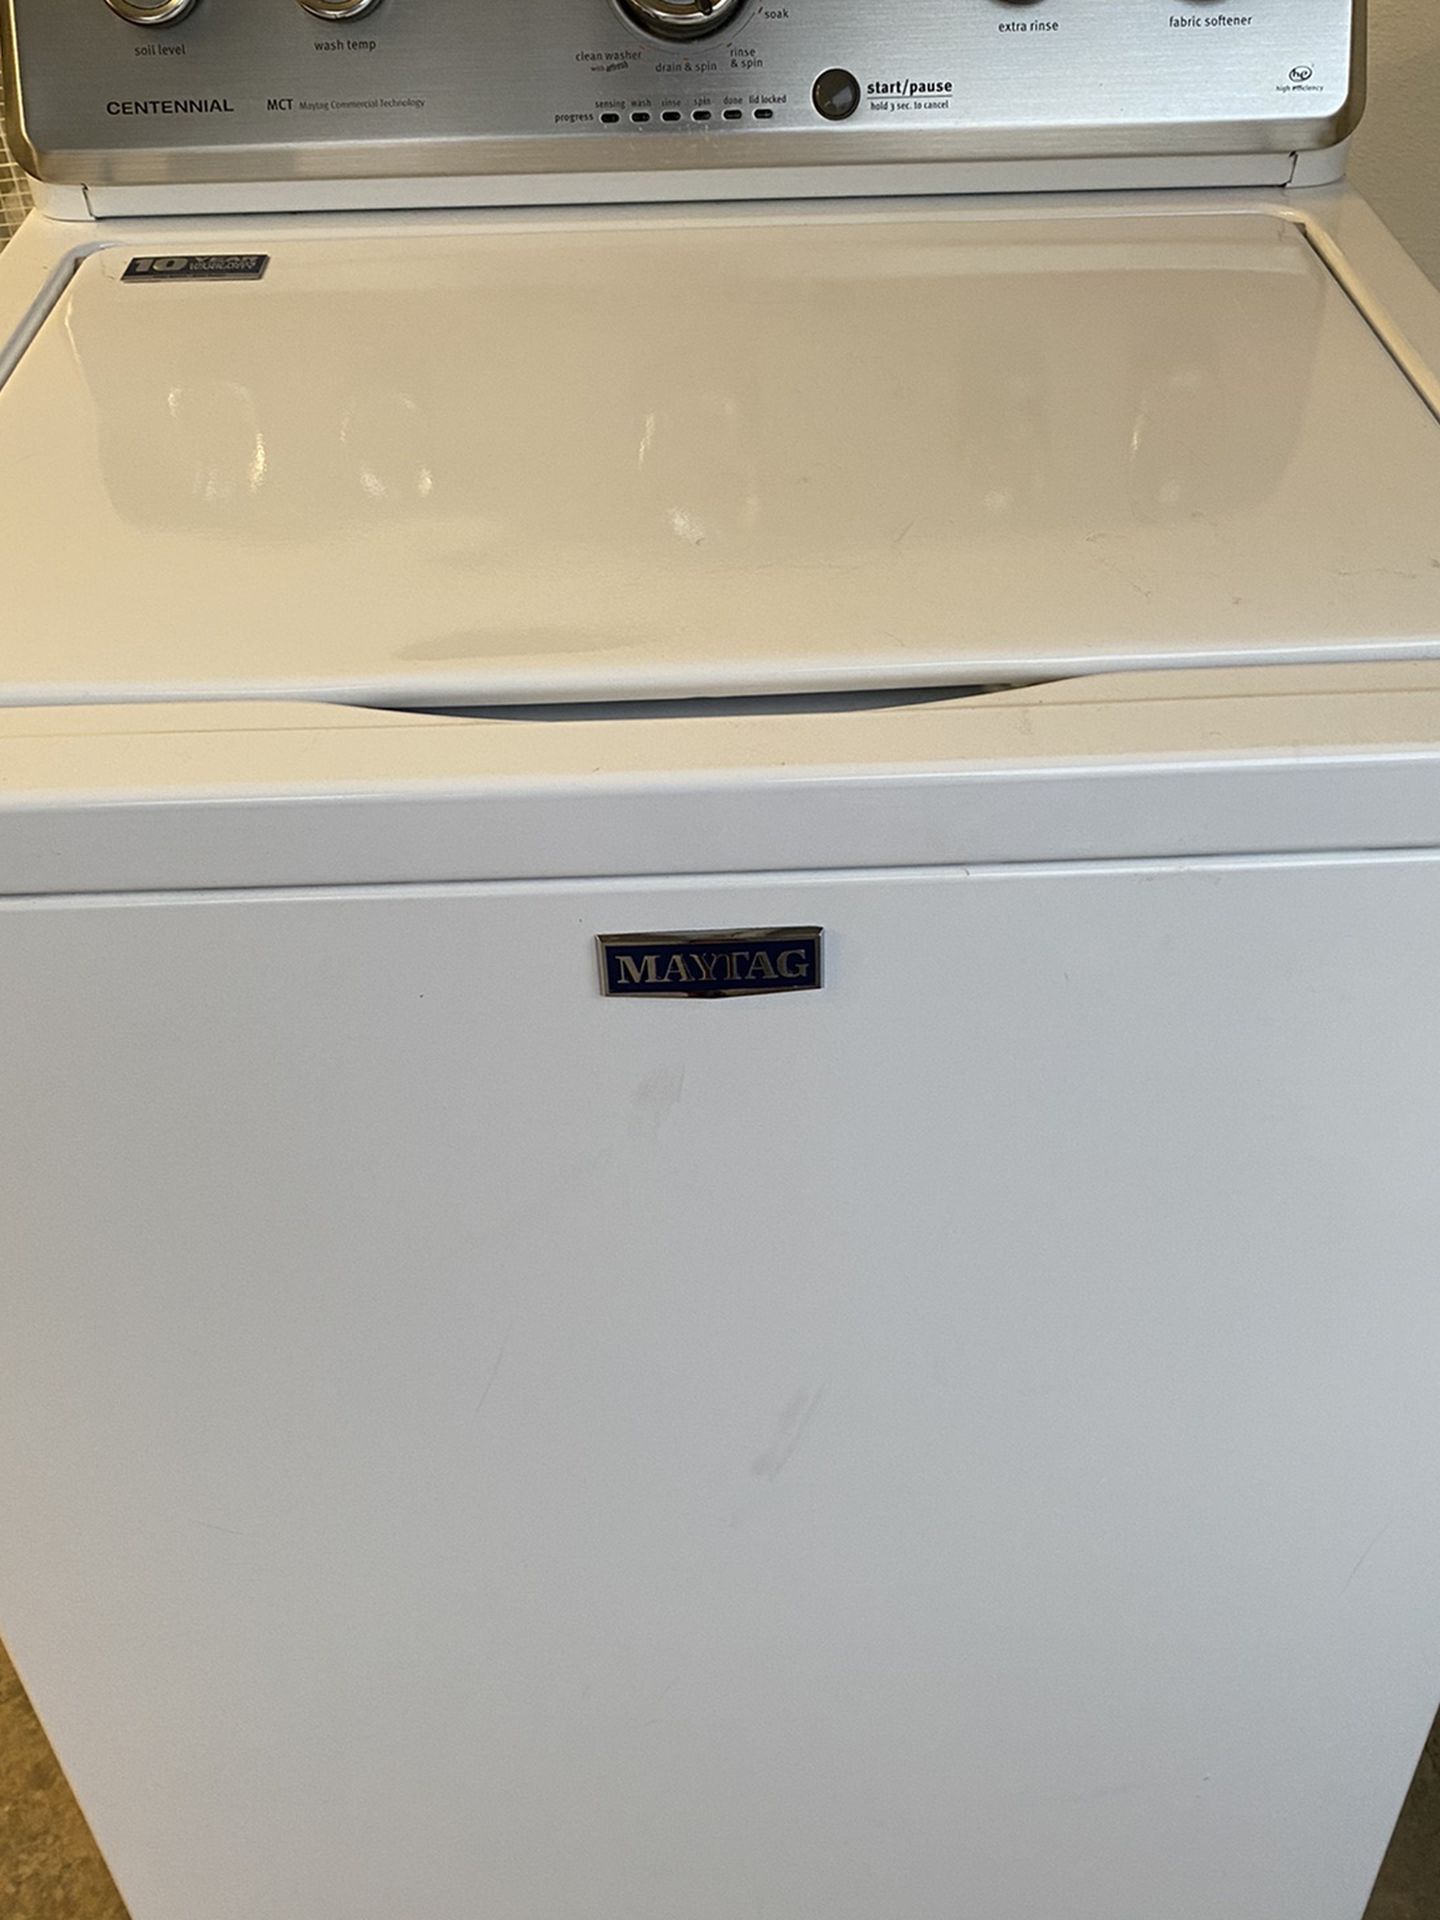 MAYTAG Top Load Washer High Efficiency - 4.2 Cu Ft (washer only)